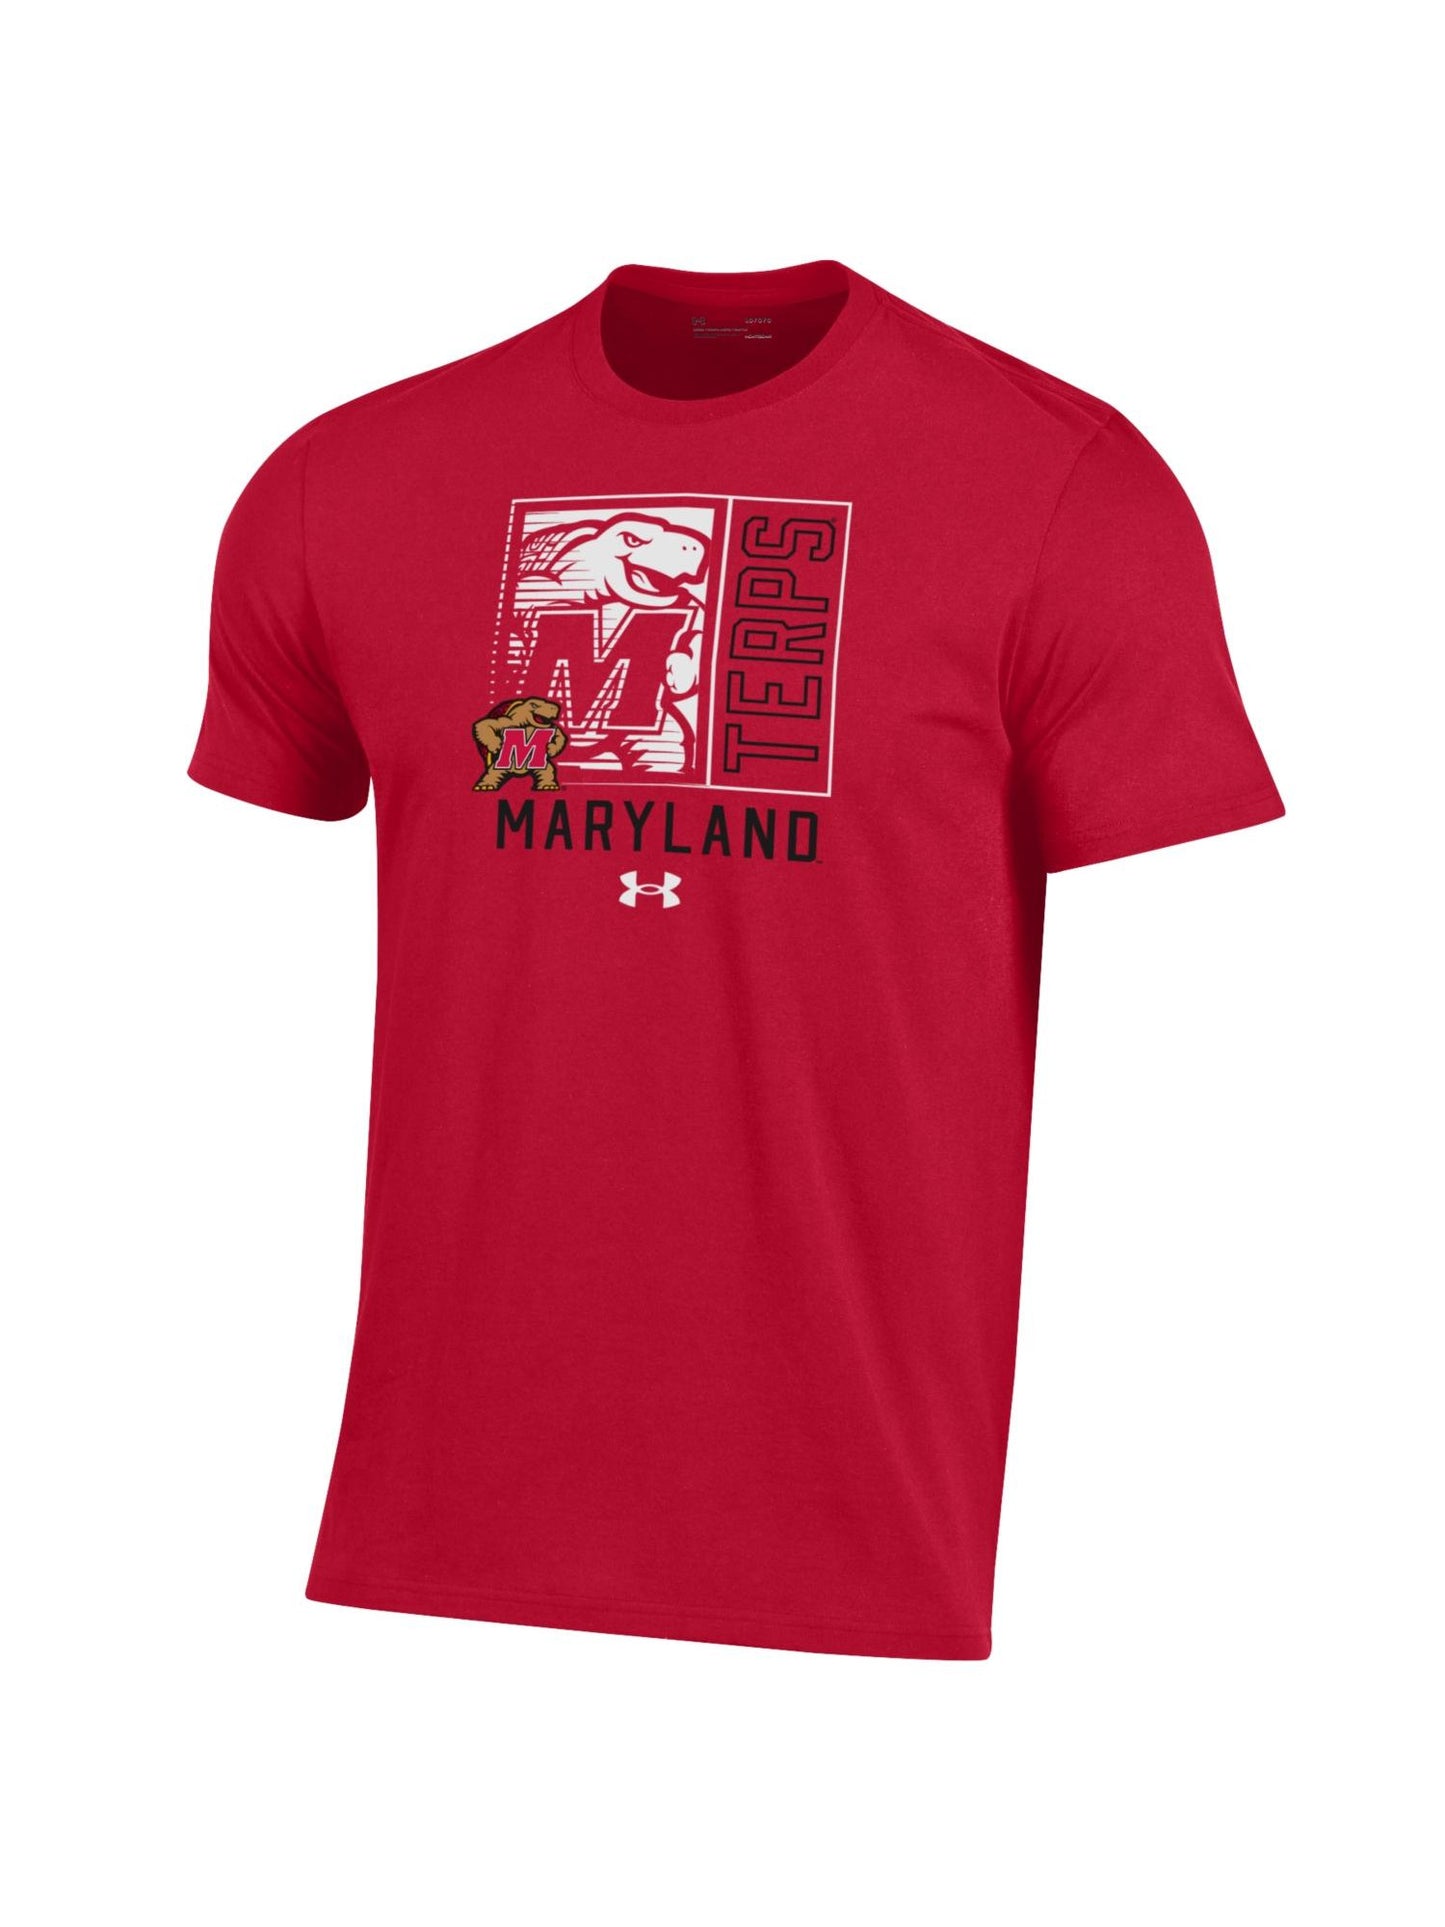 Under Armour University of Maryland Terps T-Shirt (Red)